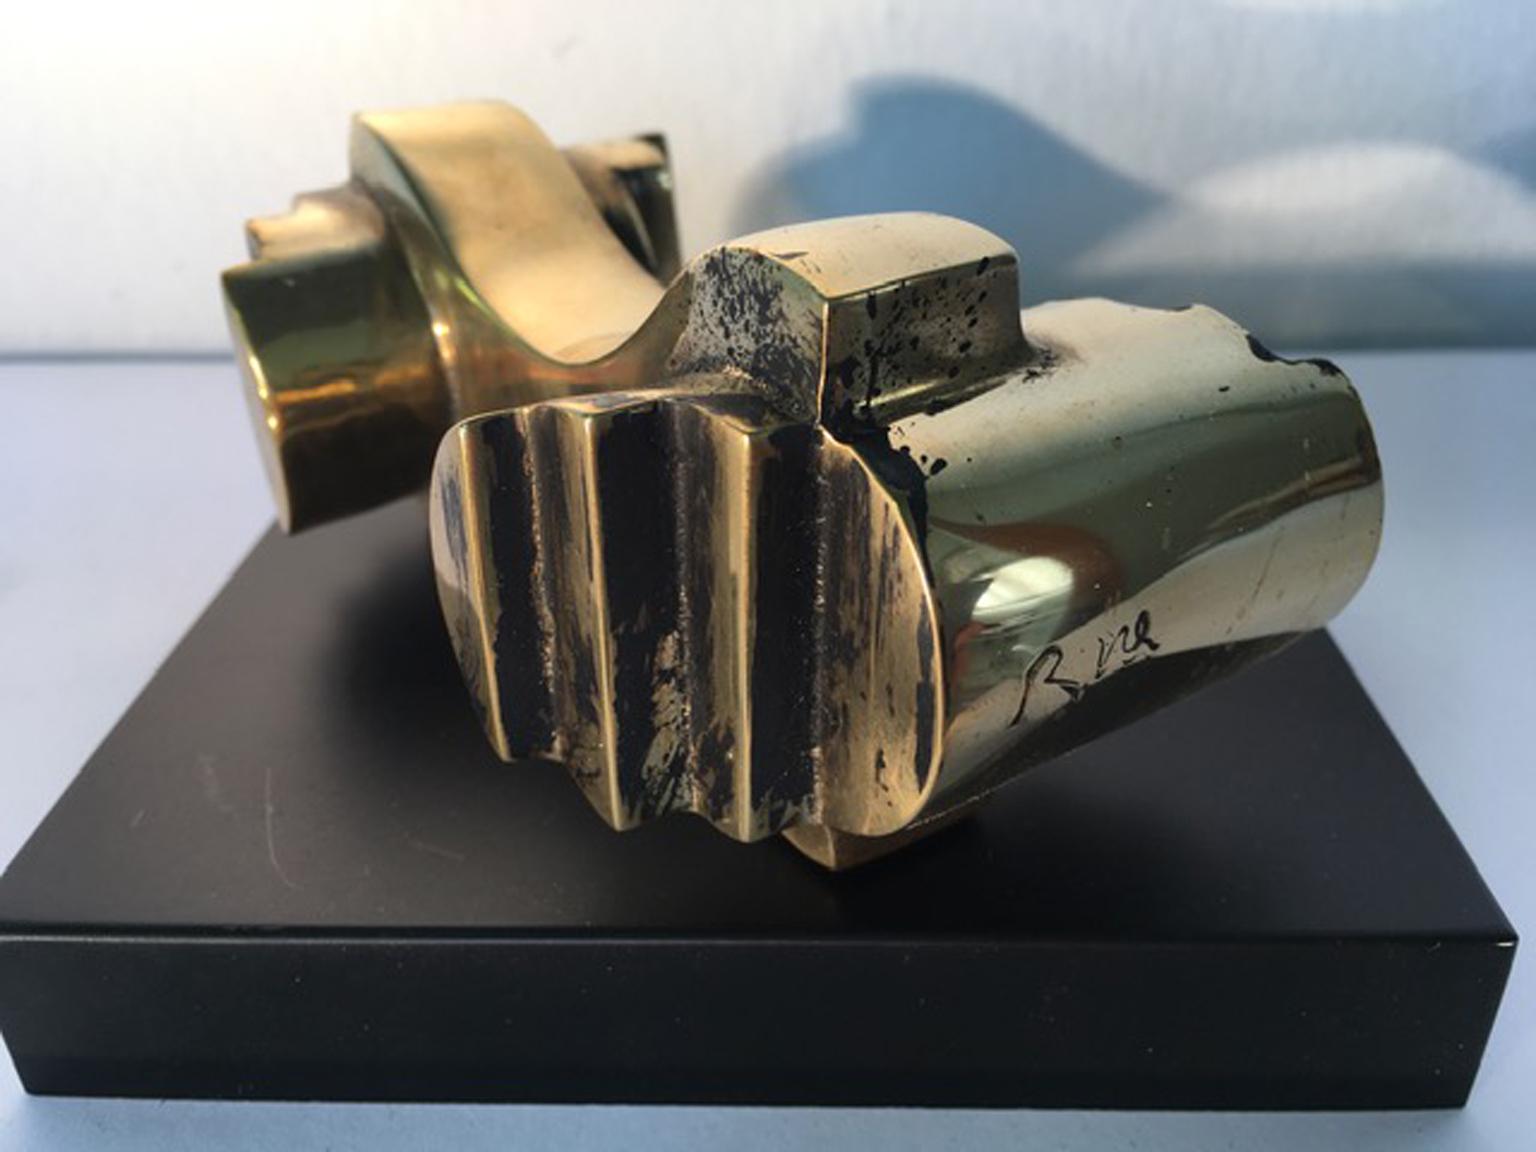 Italy 1985 Abstract Sculpture Solid Brass by Eli Riva For Sale 3